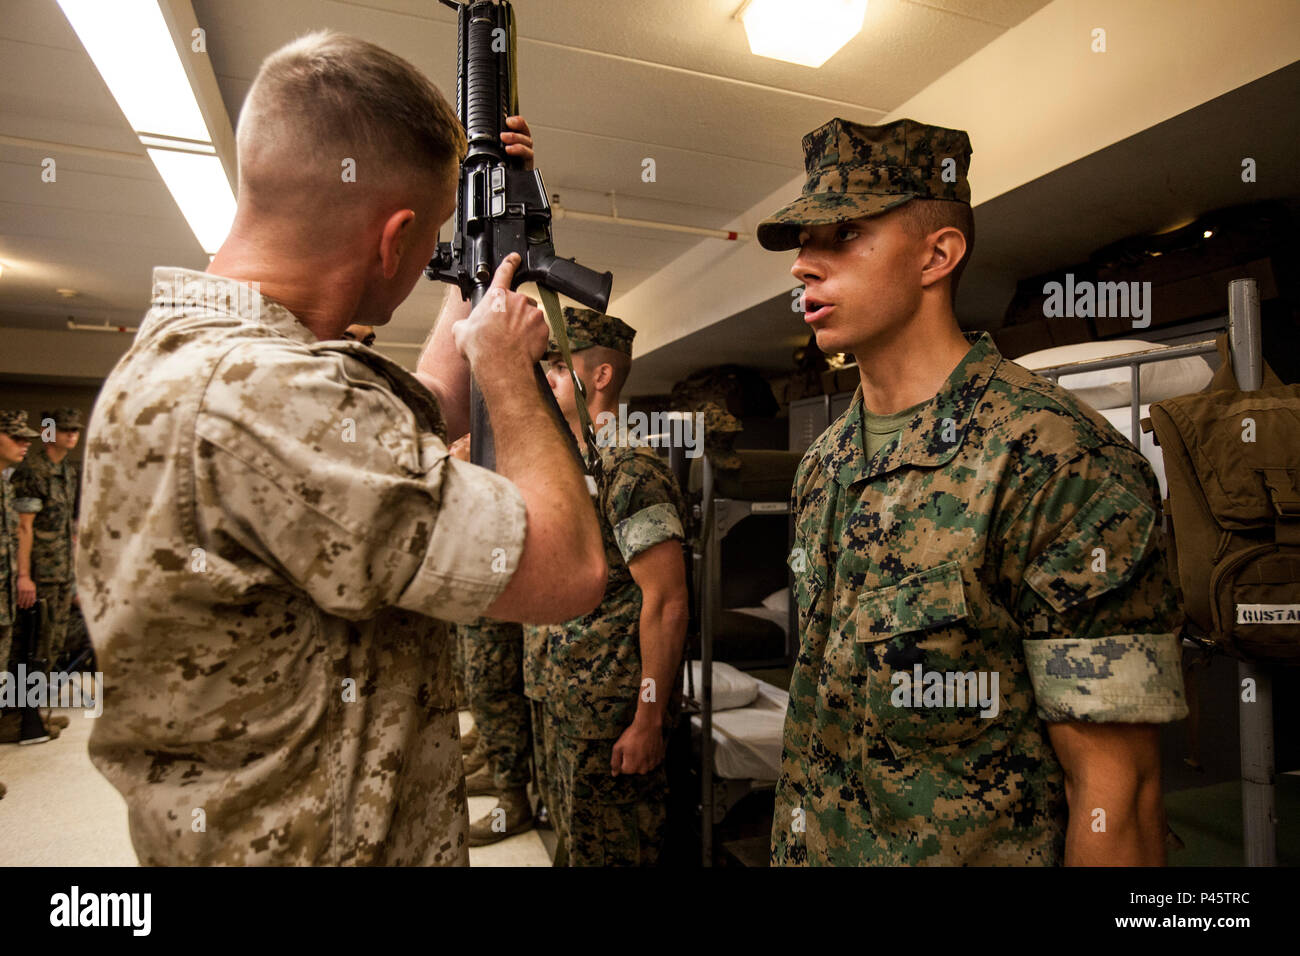 Candidates with Lima Company, Officer Candidate School (OCS) get inspected during the Platoon Commander's Inspection aboard Marine Corps Base Quantico, Va., June 18, 2016. The mission of OCS is to educate and train officer candidates in order to evaluate and screen individuals for qualities required for commissioning as a Marine Corps officer. (U.S. Marine Corps Combat Camera photo by Lance Cpl. Jose Villalobosrocha/Released) Stock Photo